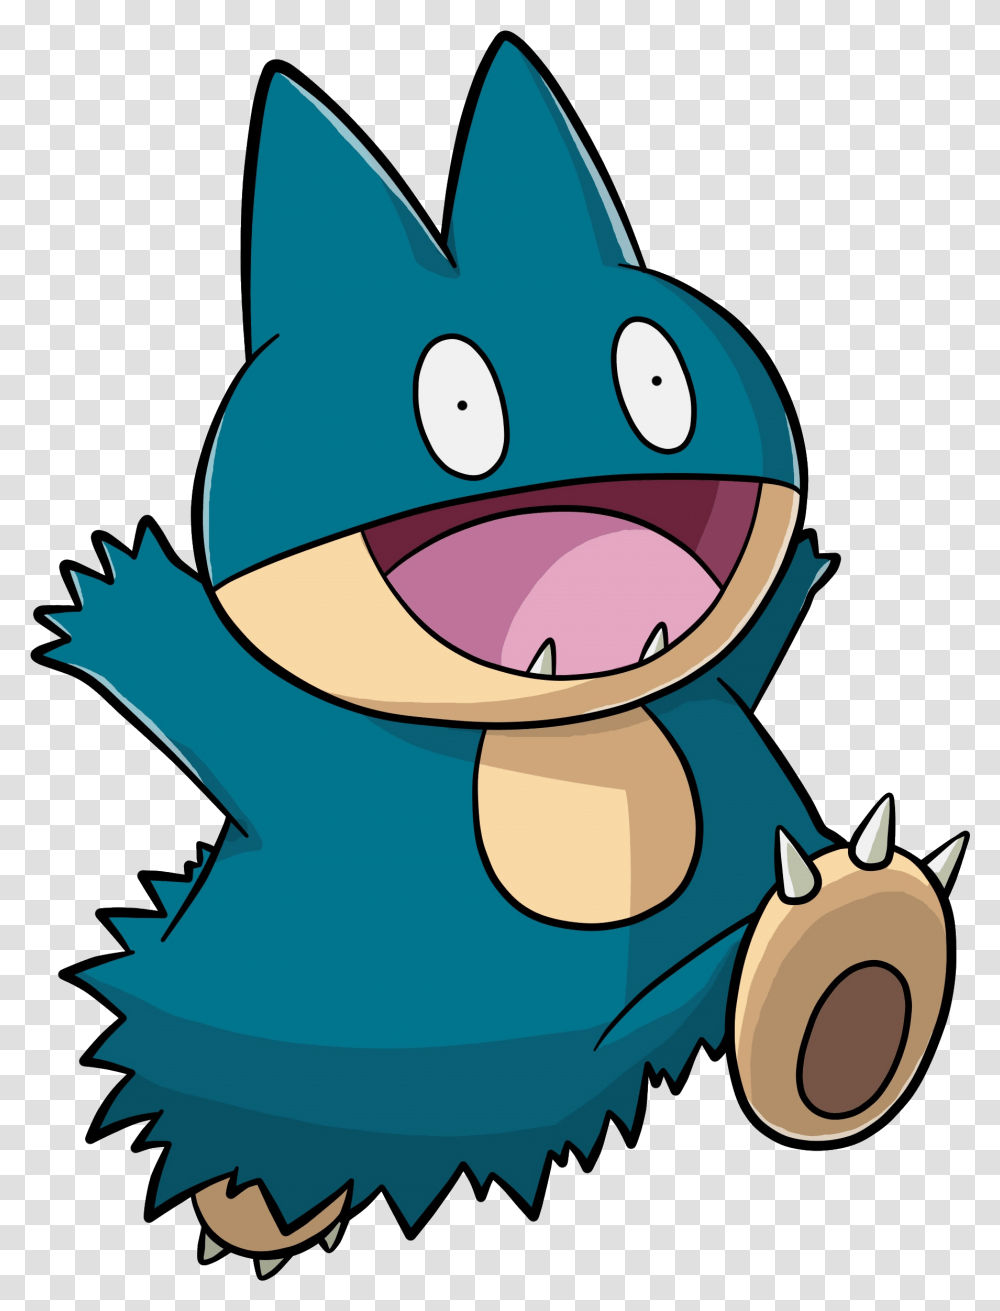 Download Pokemon Image For Free Munchlax, Graphics, Art, Plant, Angry Birds Transparent Png